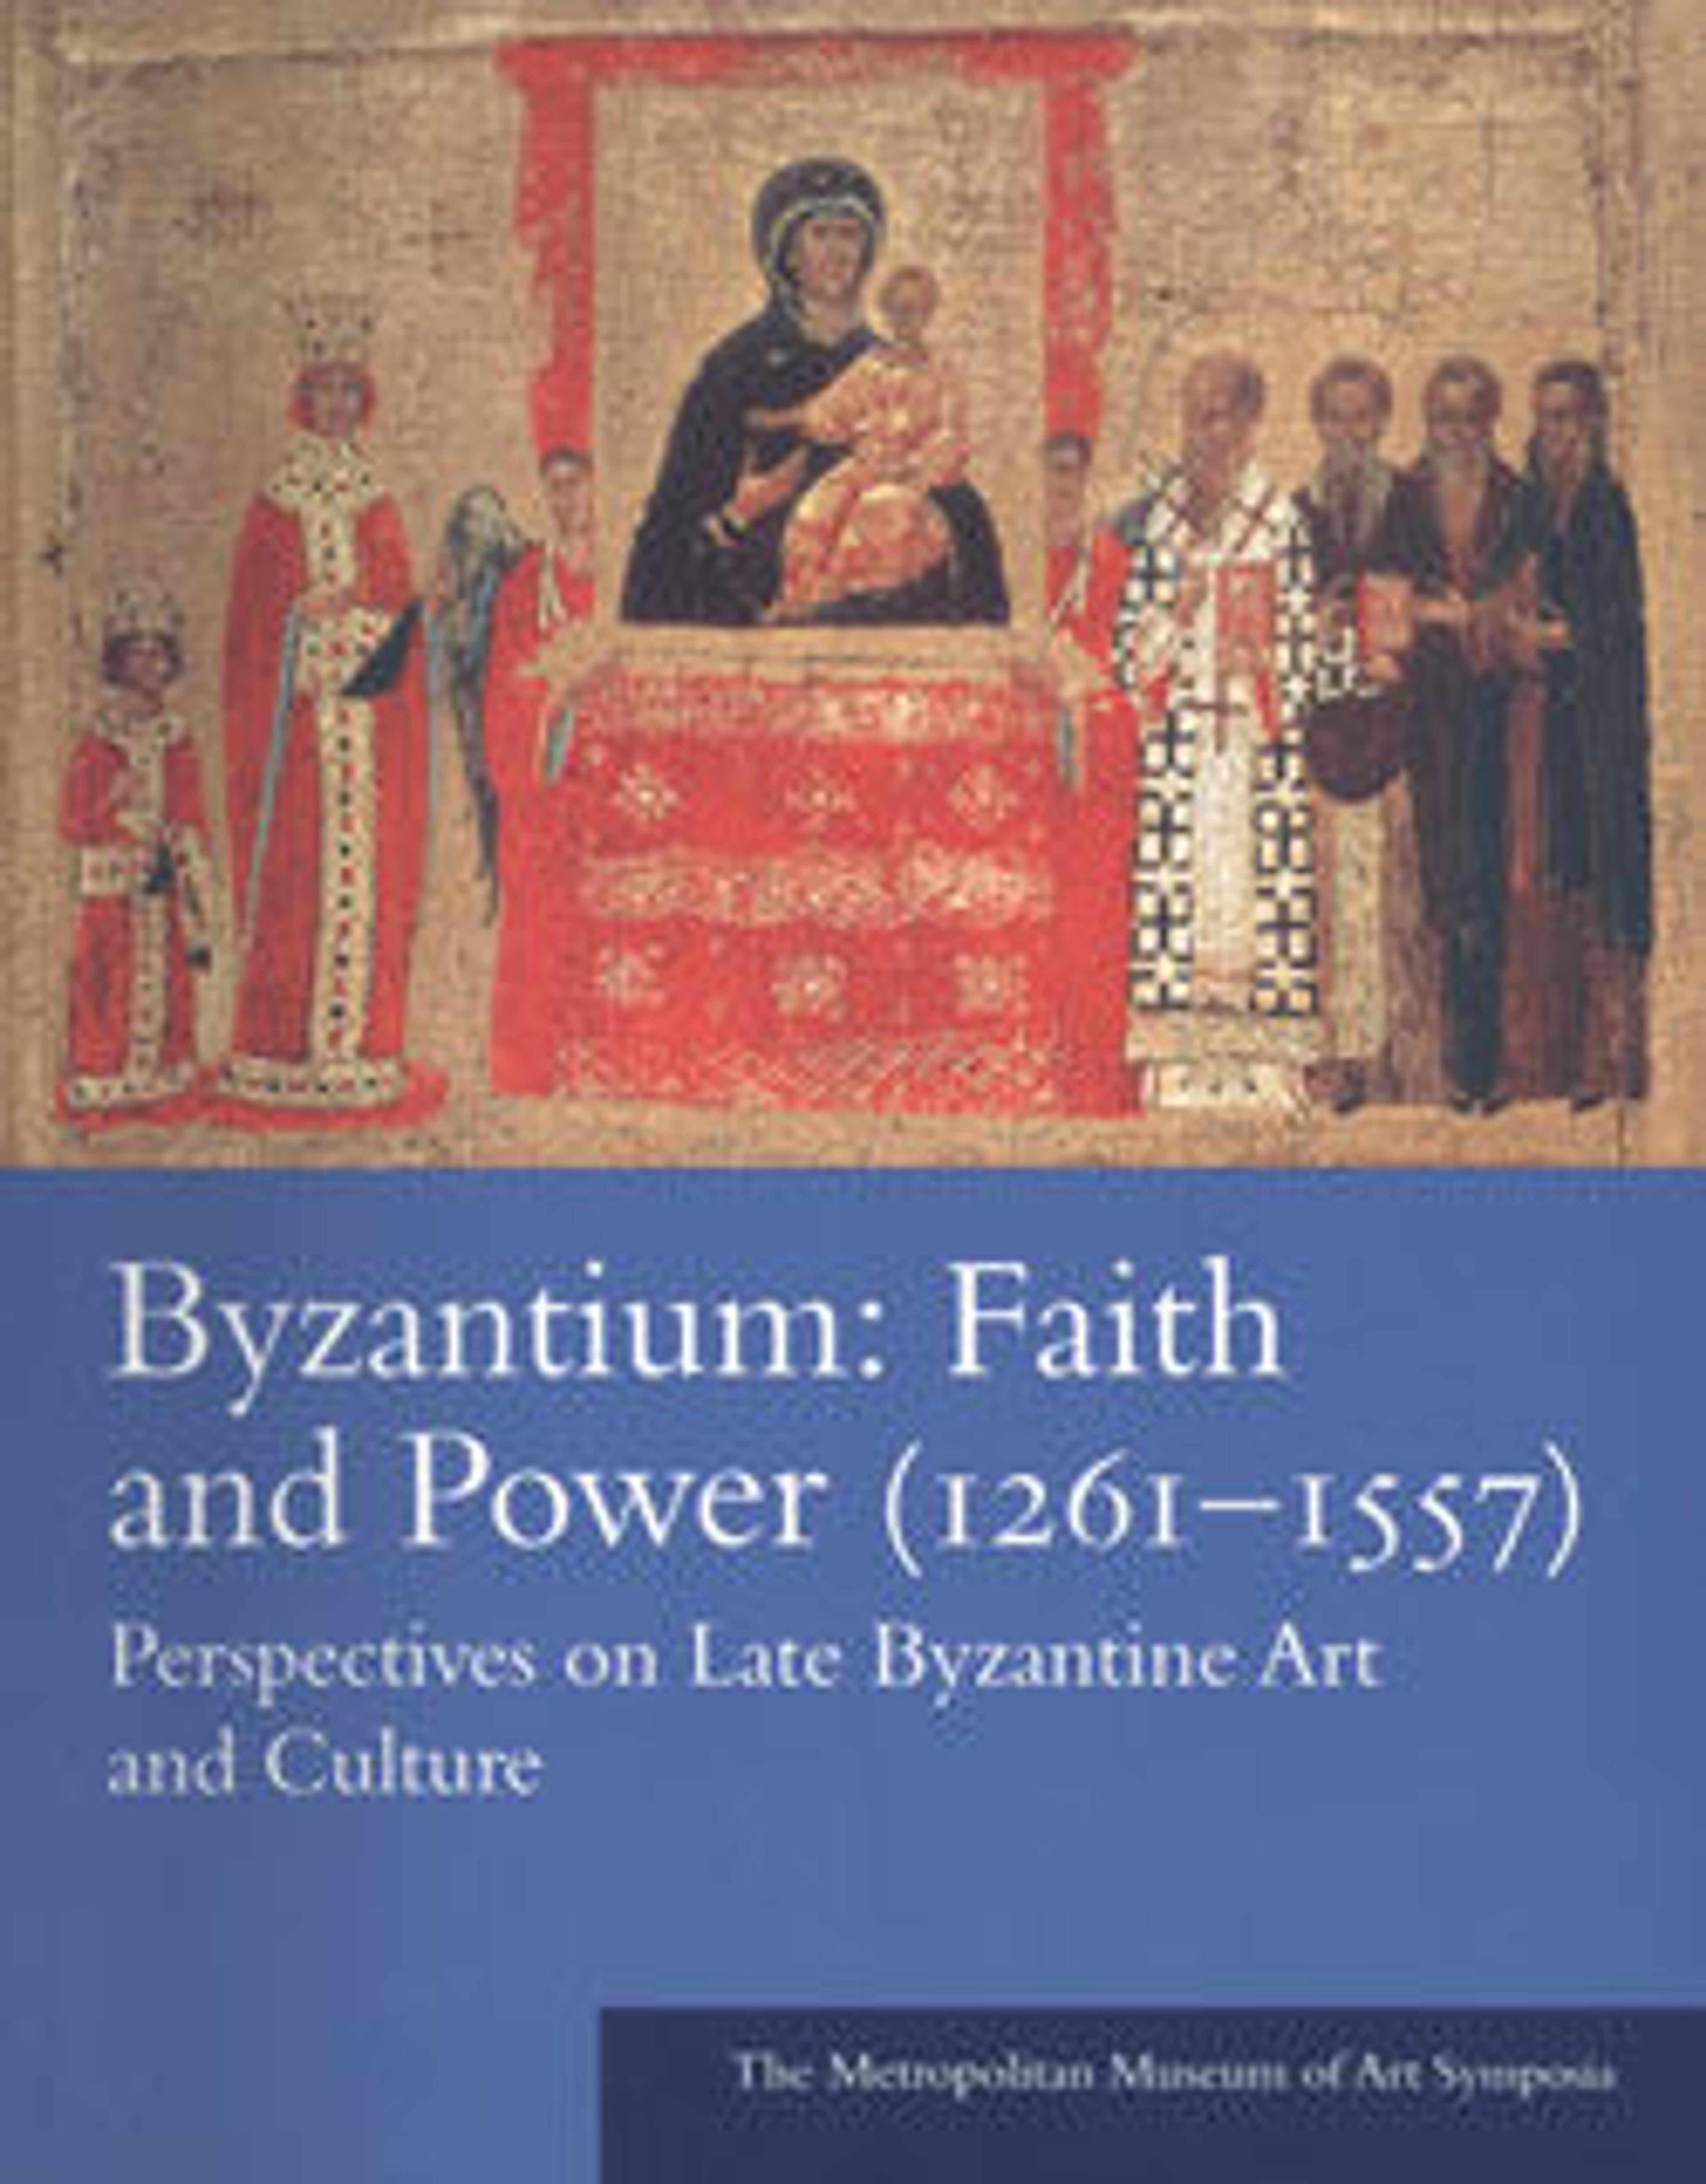 Byzantium: Faith and Power (1261-1557): Perspectives on Late Byzantine Art and Culture